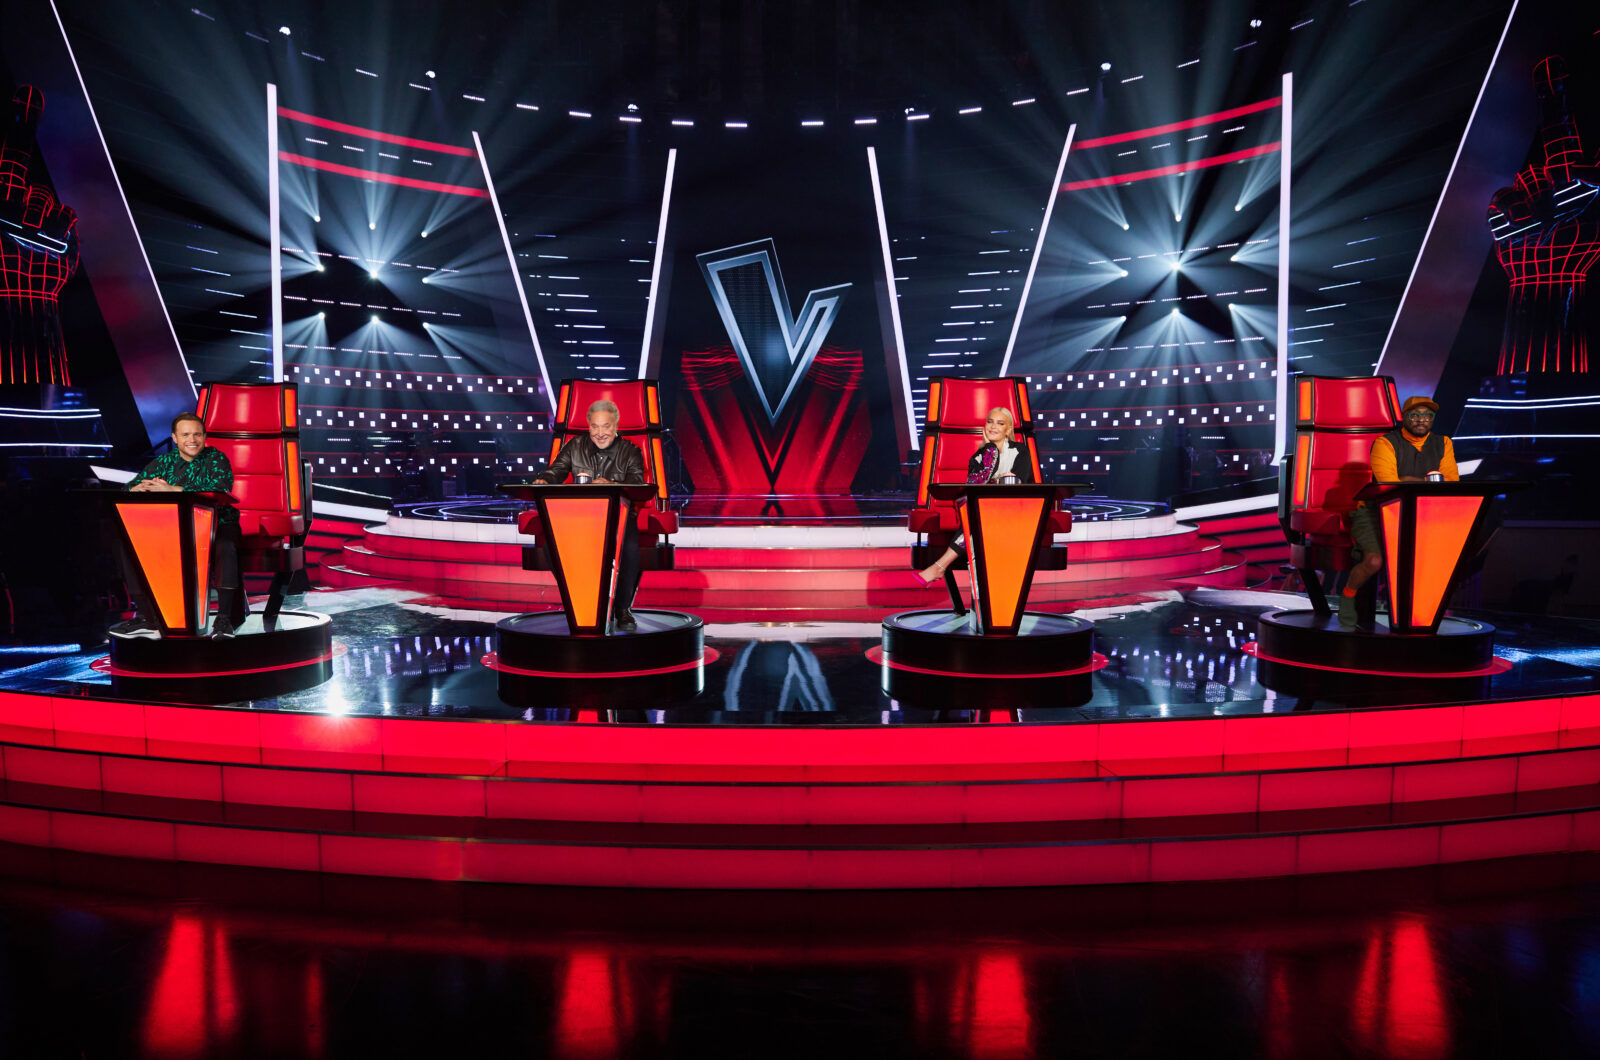 The Voice UK is holding auditions in Manchester city centre next week